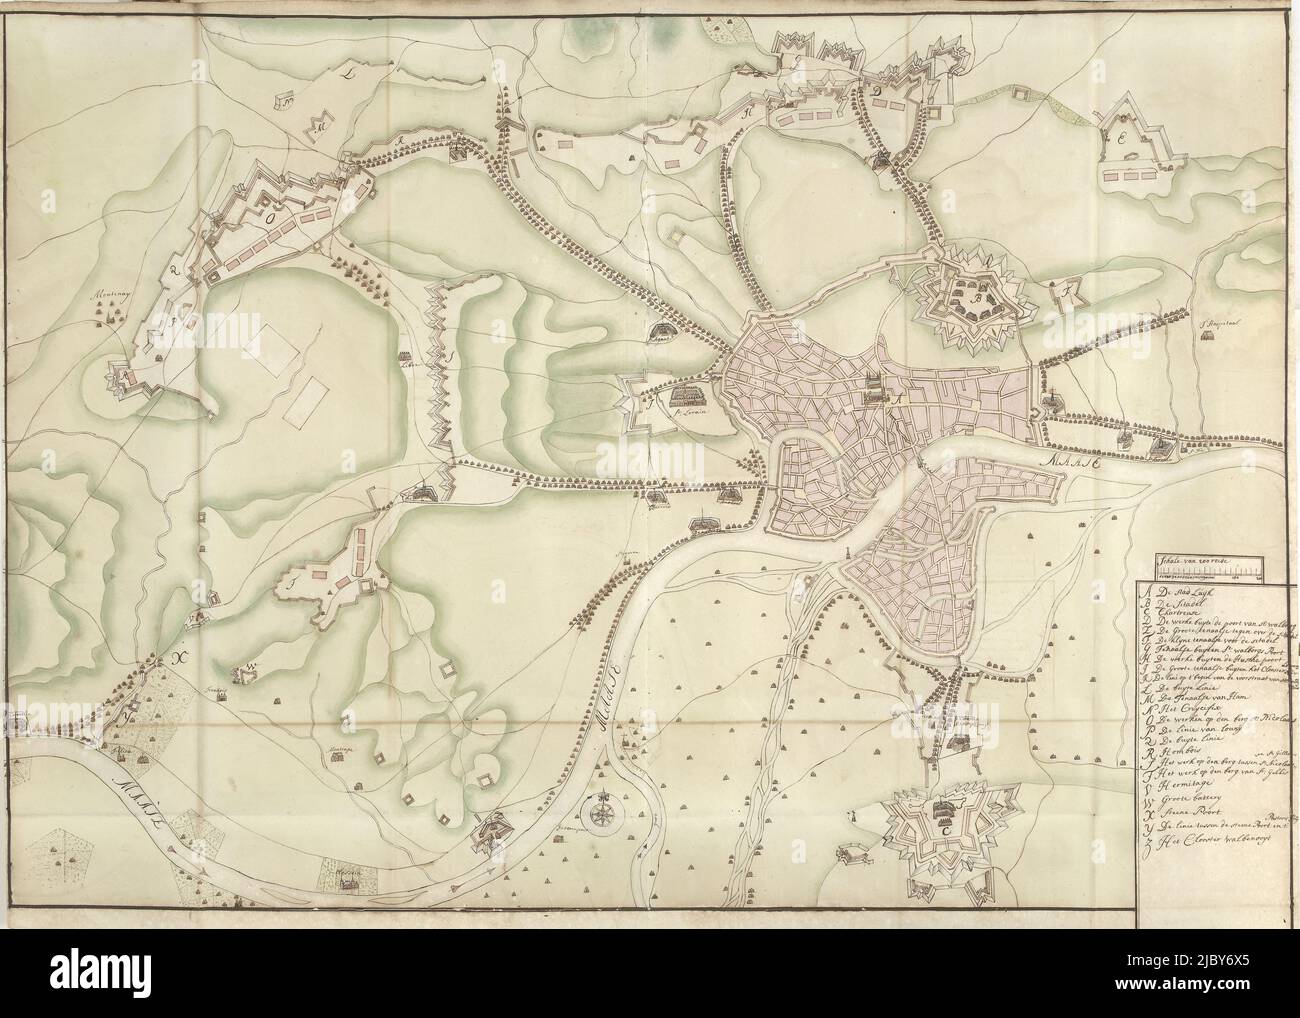 Map of Liege, ca. 1701-1715, Samuel Du Ry de Champdoré, 1701 - 1715, Map of  the fortifications around the city of Liege, ca. 1701-1715. Bottom right  legend A-Z in Dutch. Part of